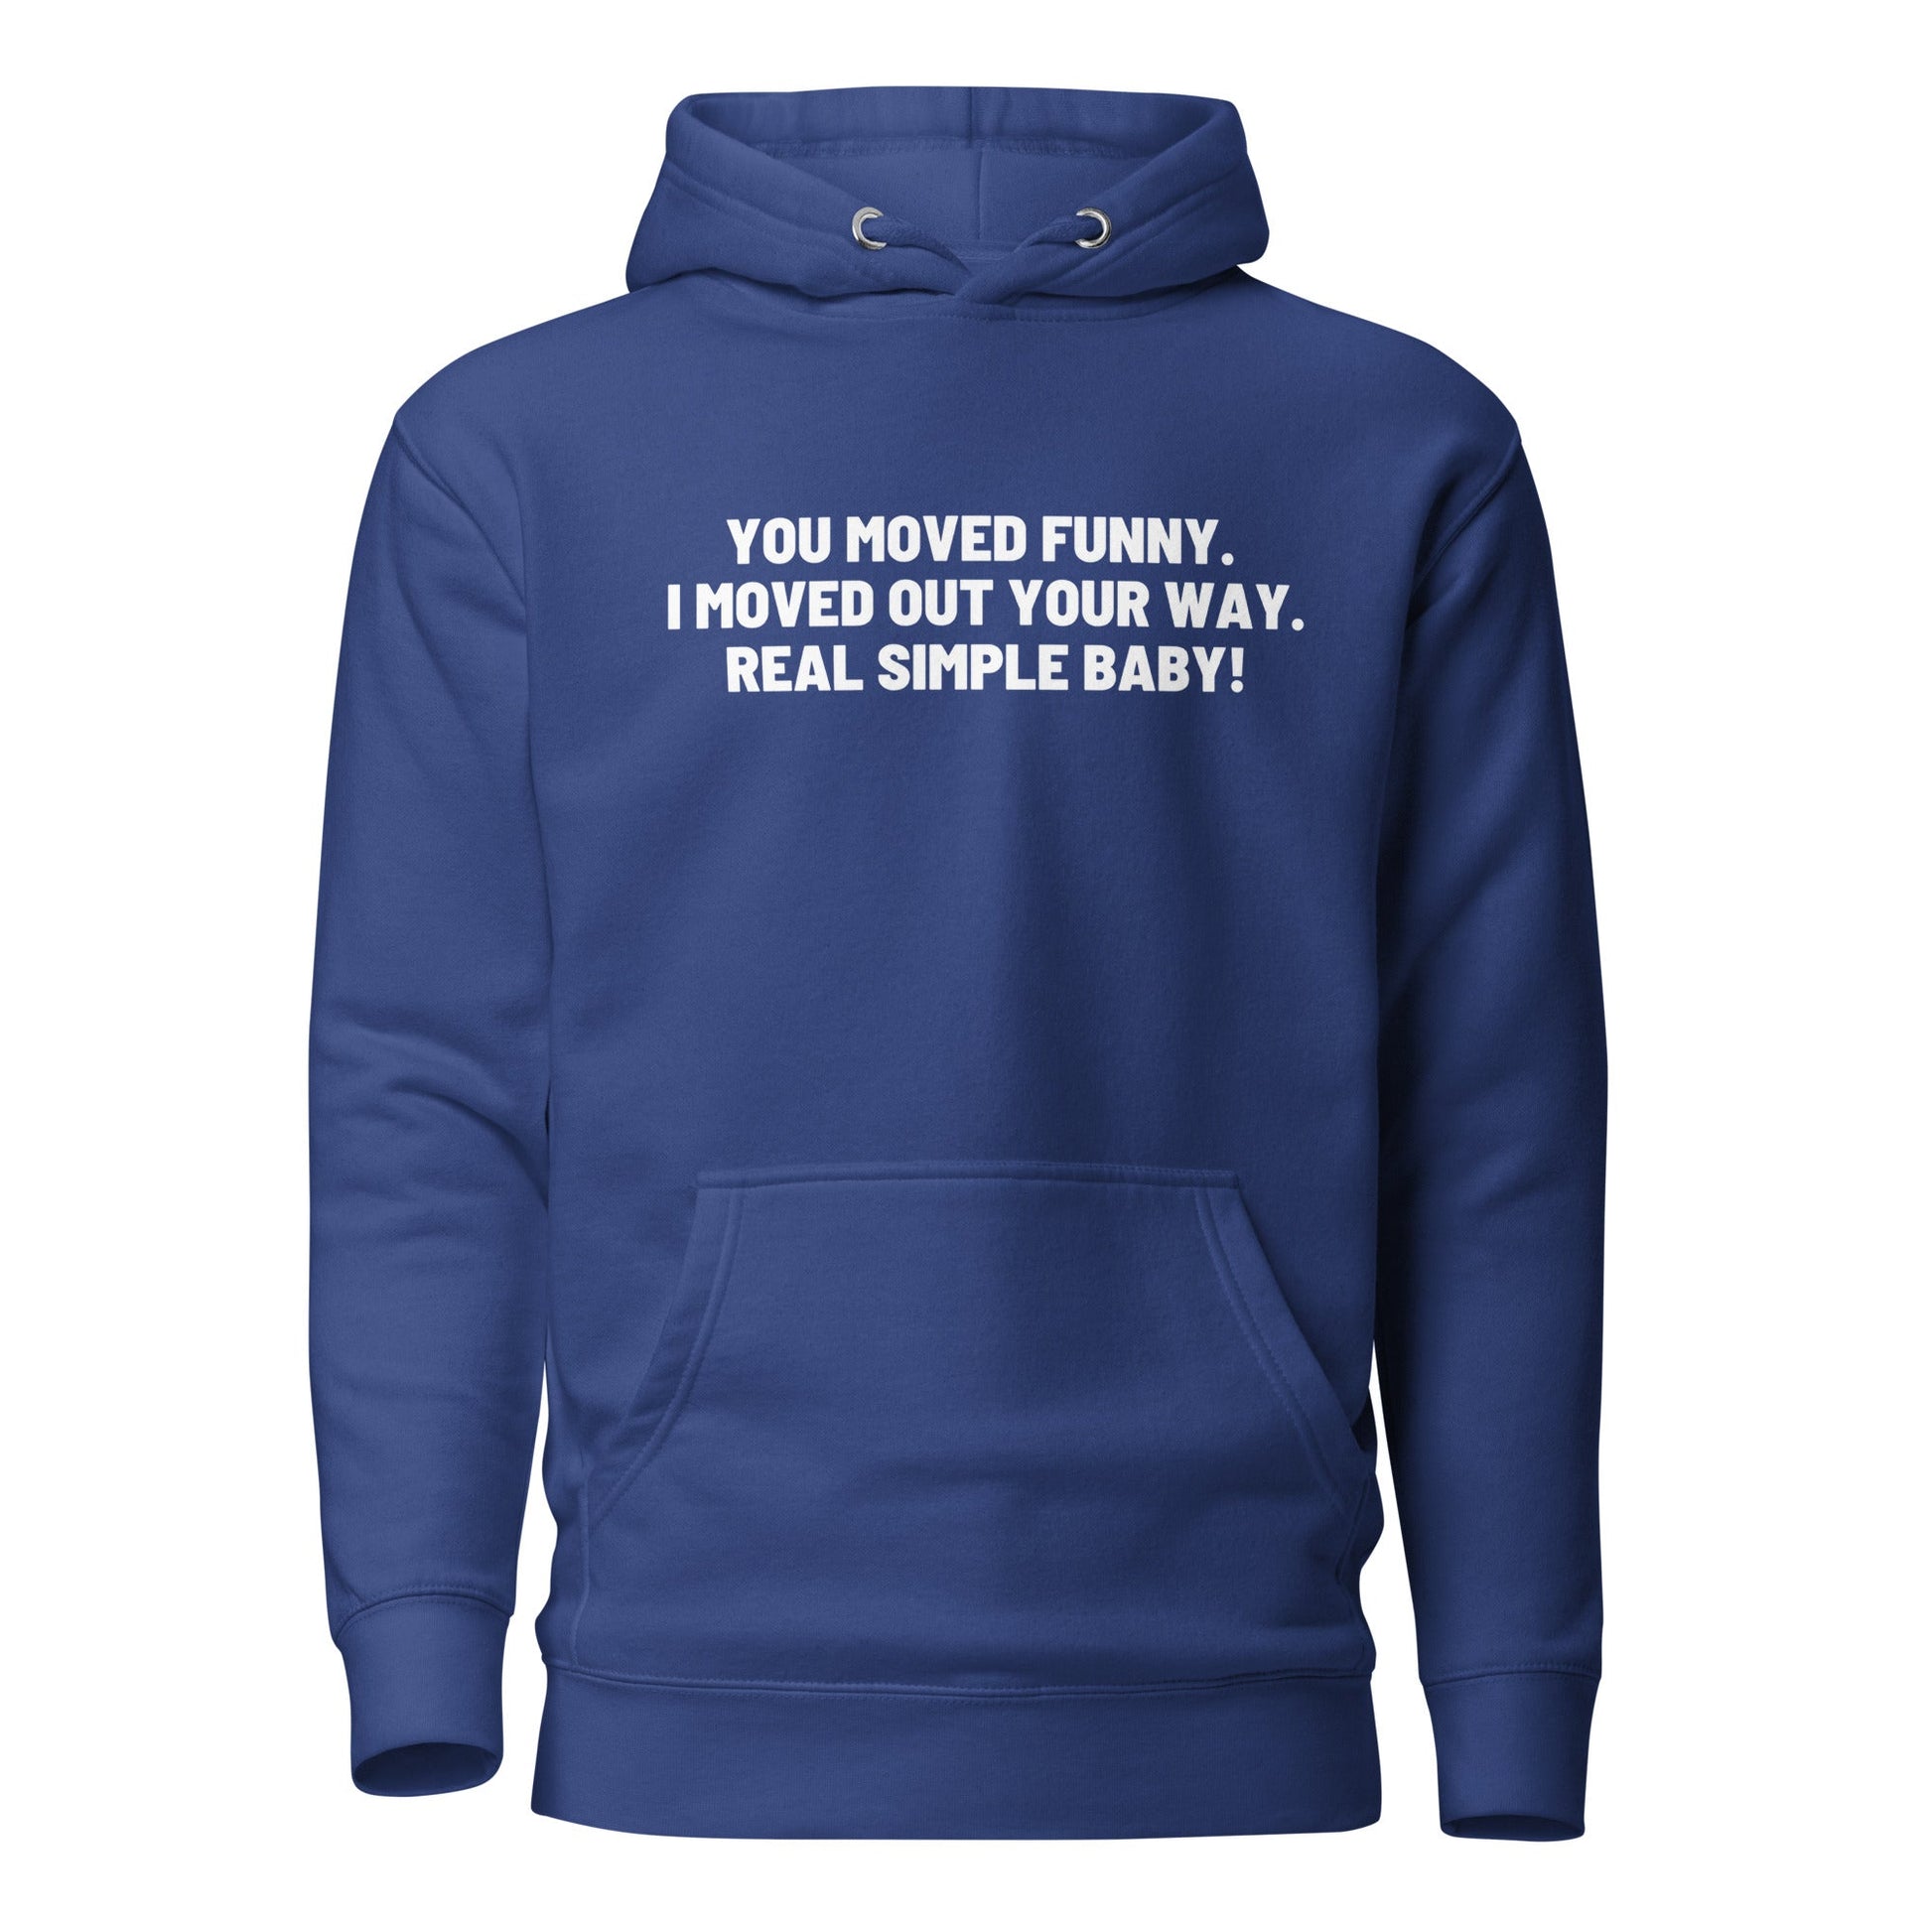 You Moved Funny. I Moved Out Your Way. Real Simple Baby. Unisex Hoodie - Catch This Tea Shirt